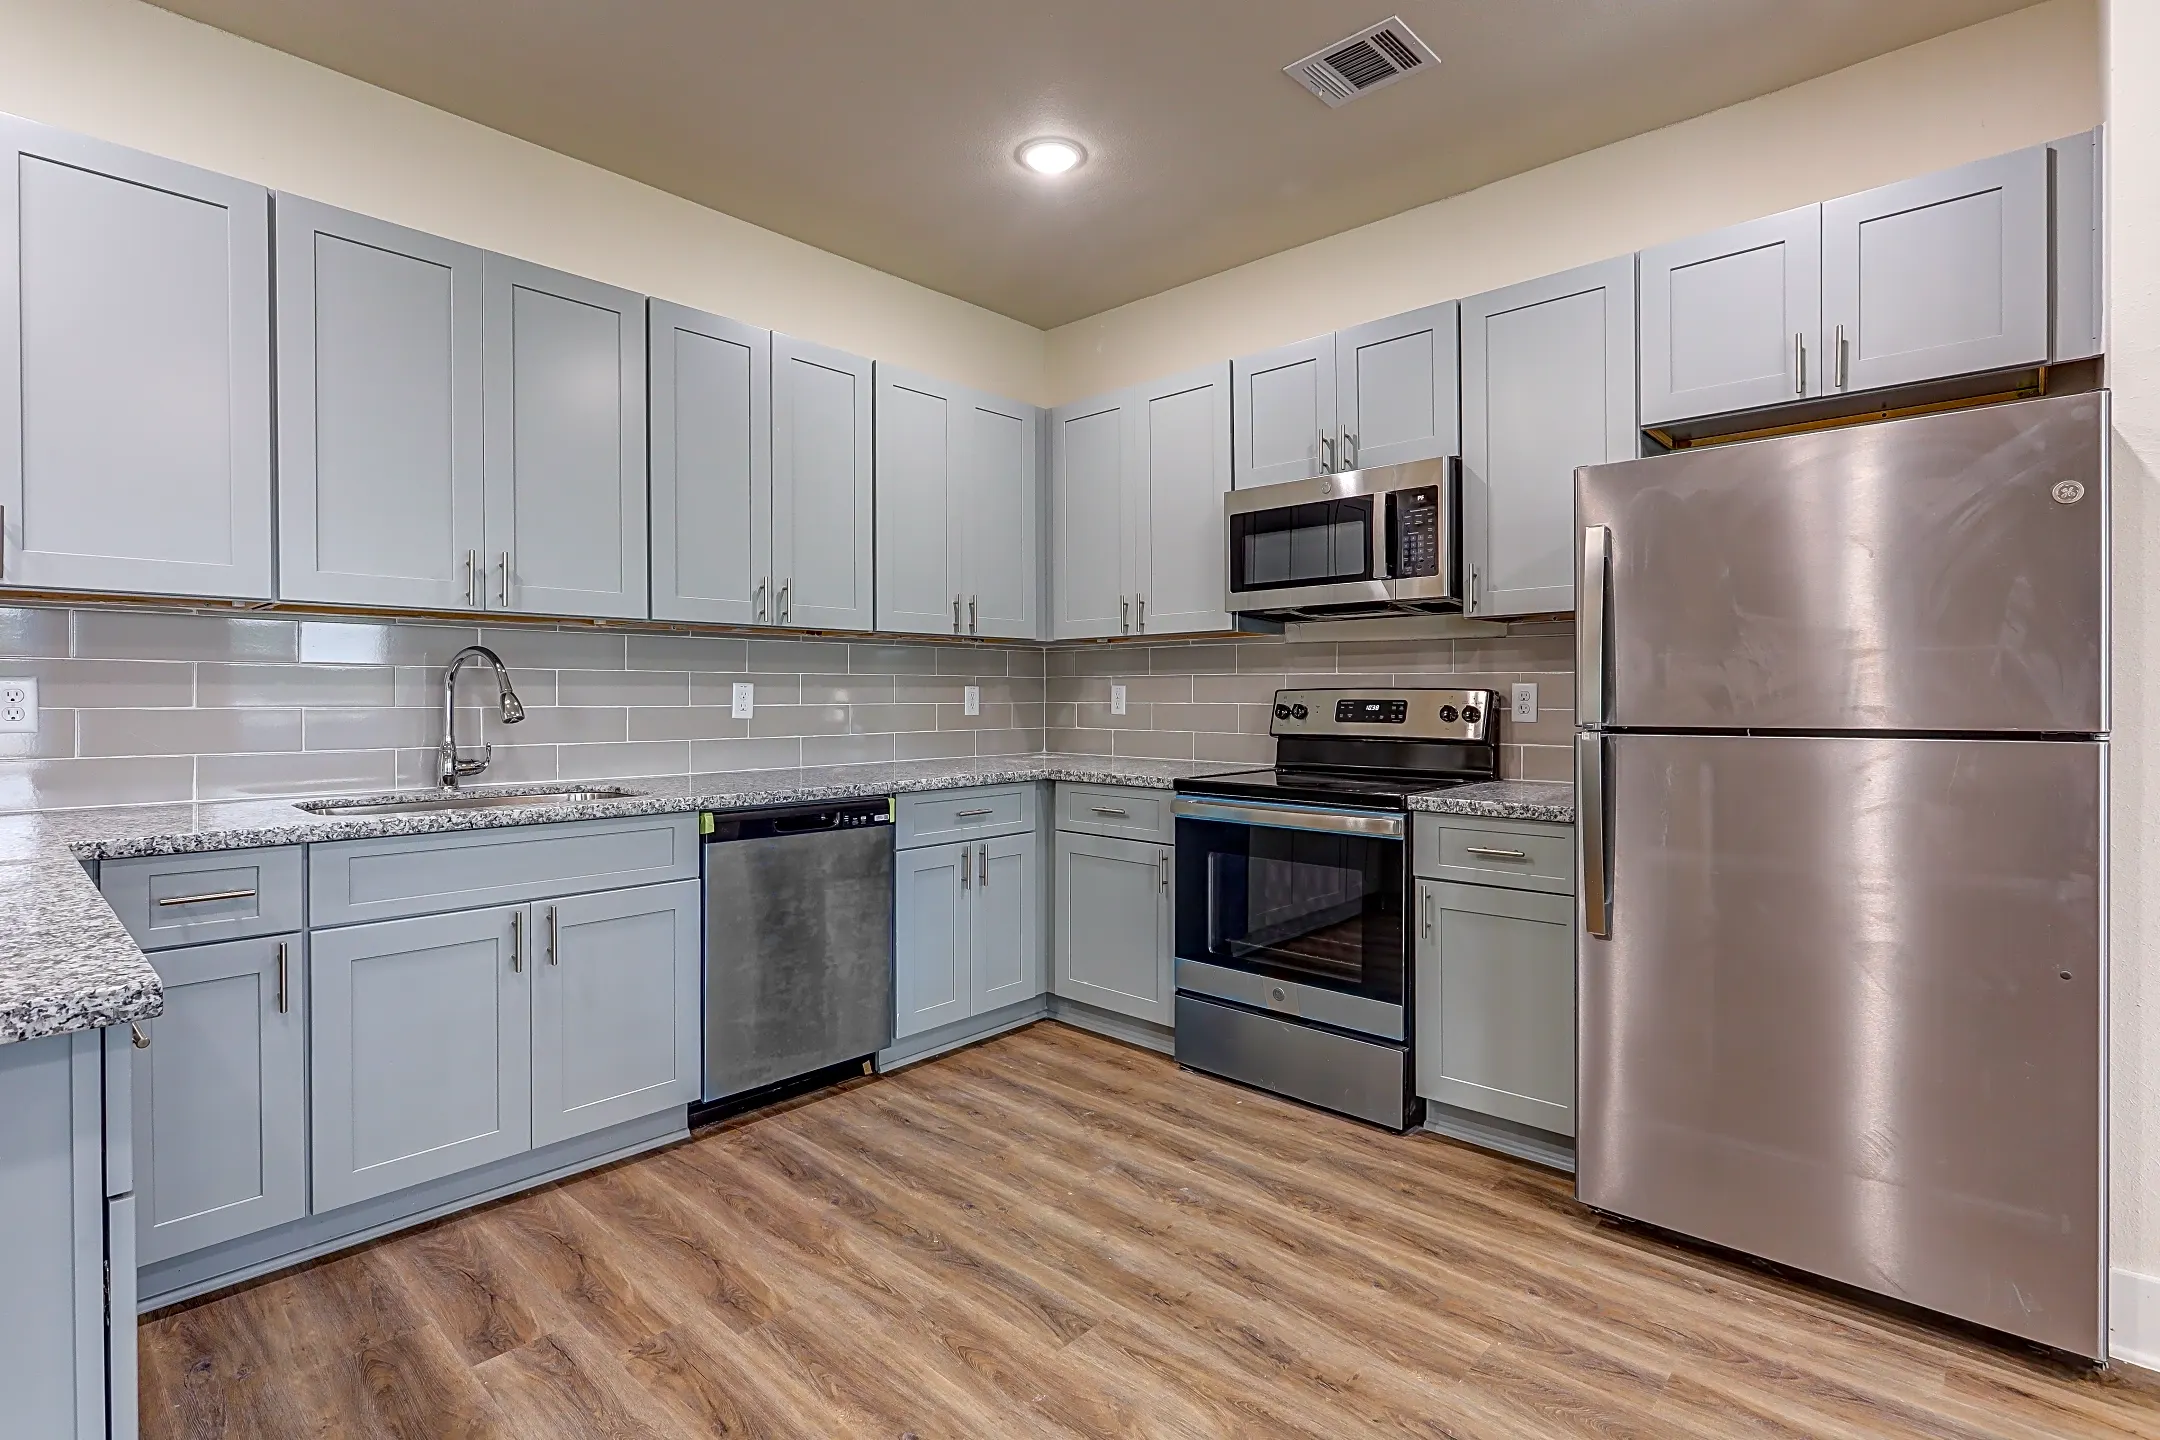 Kitchen - Azul Apartments - The Woodlands - Spring, TX